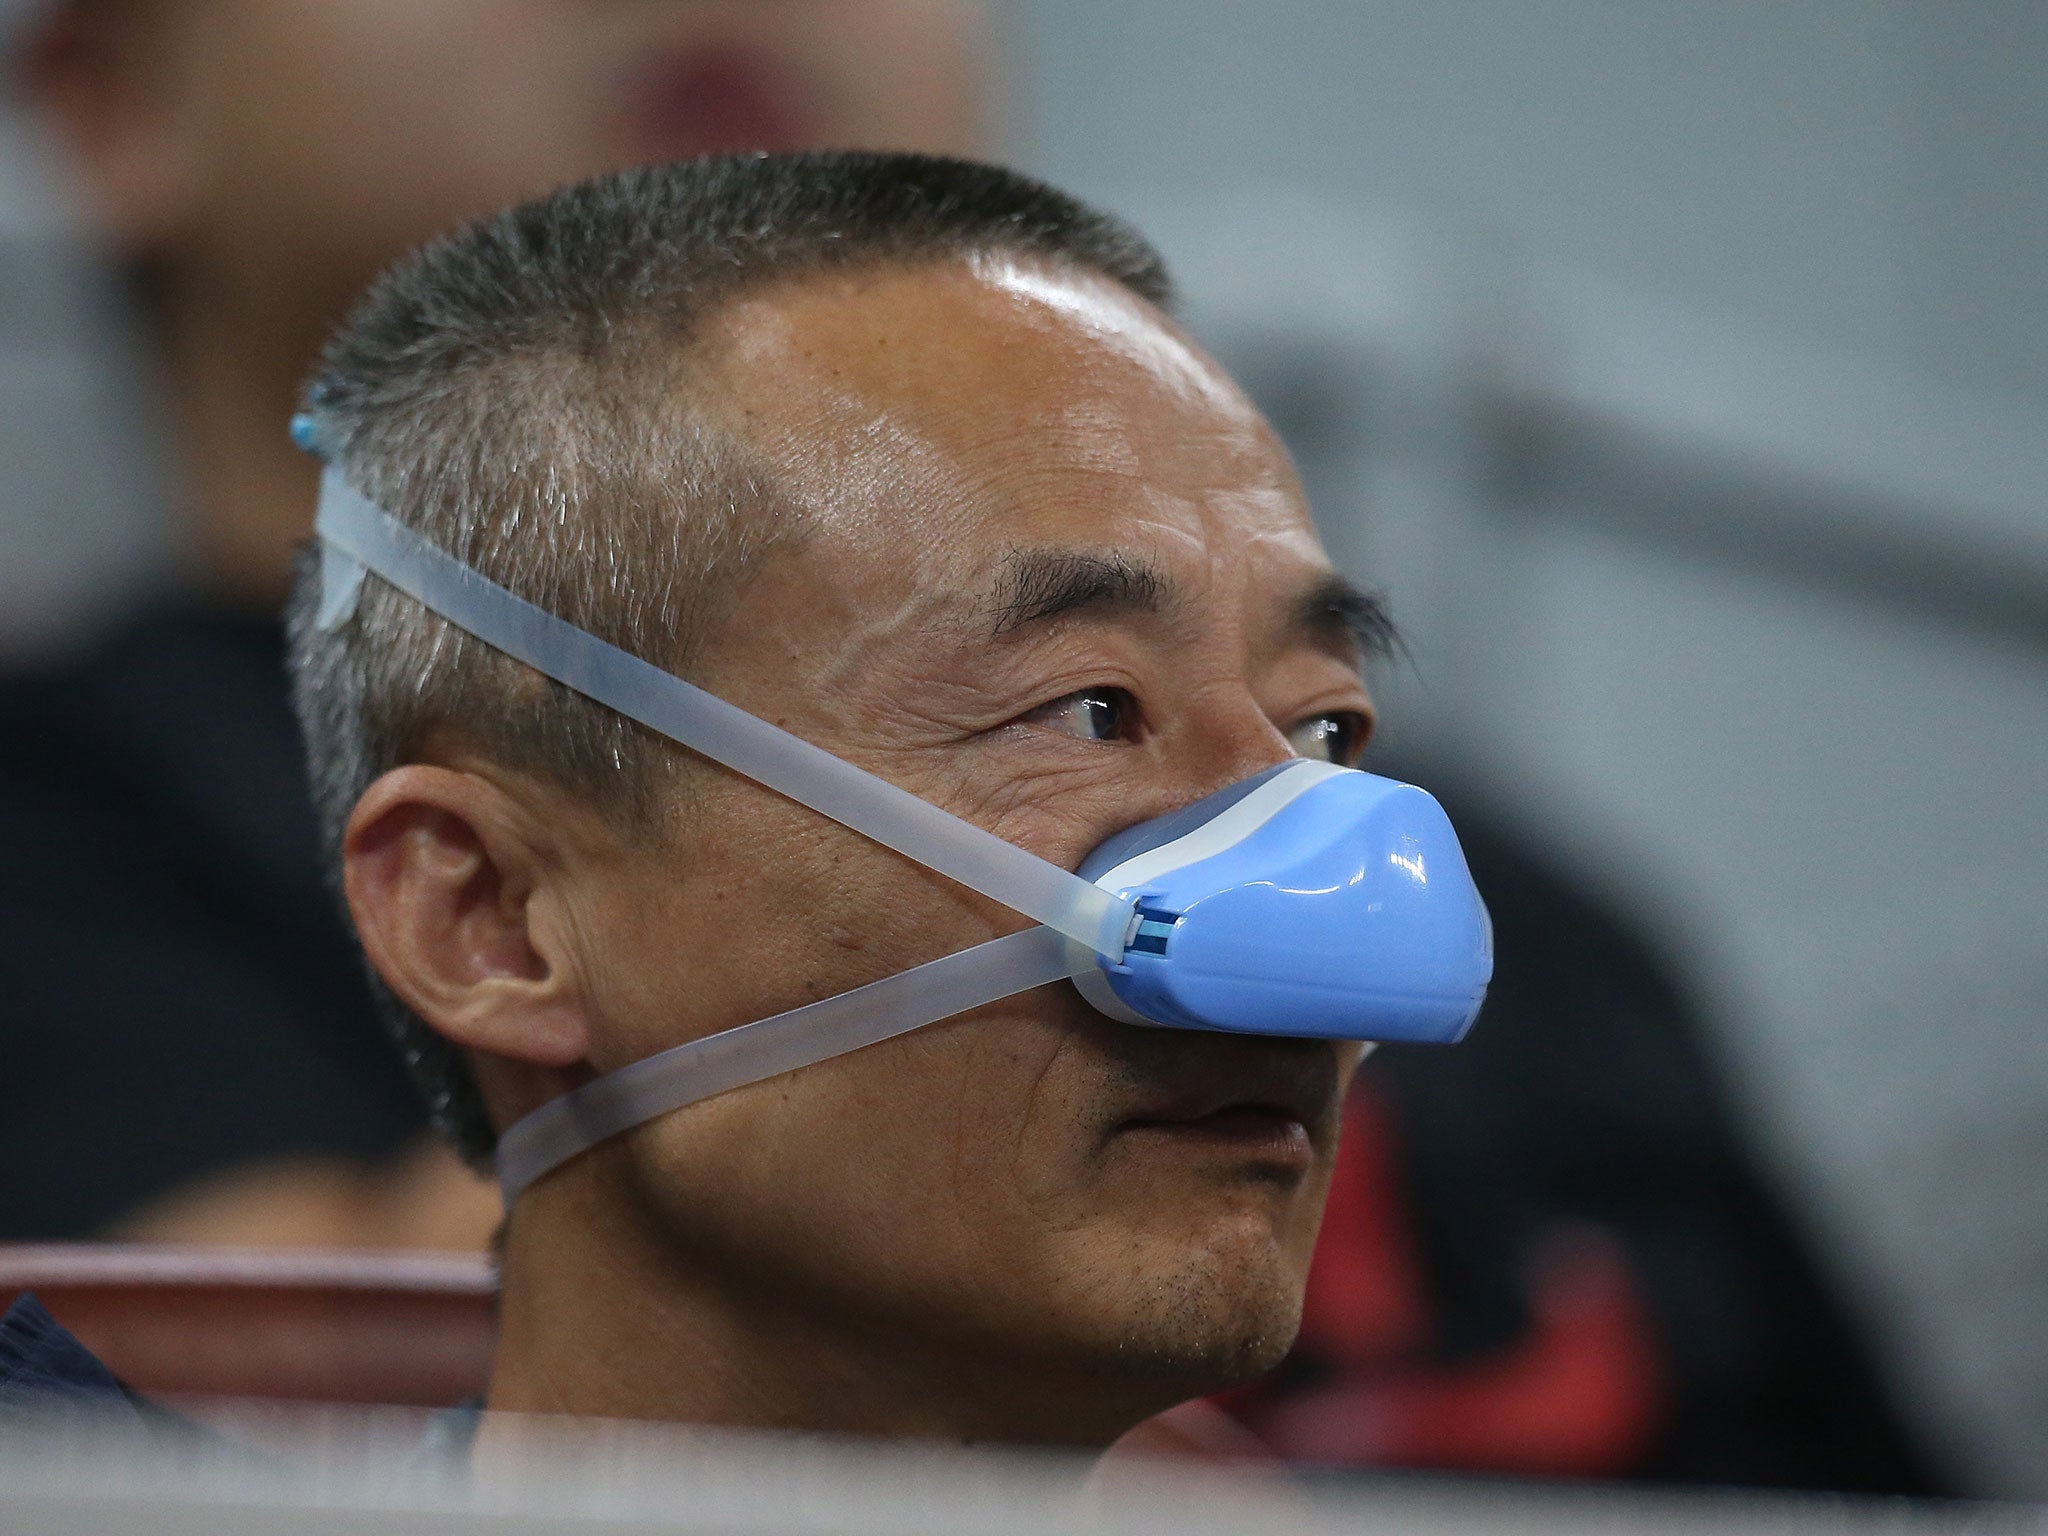 A fan at the China Open